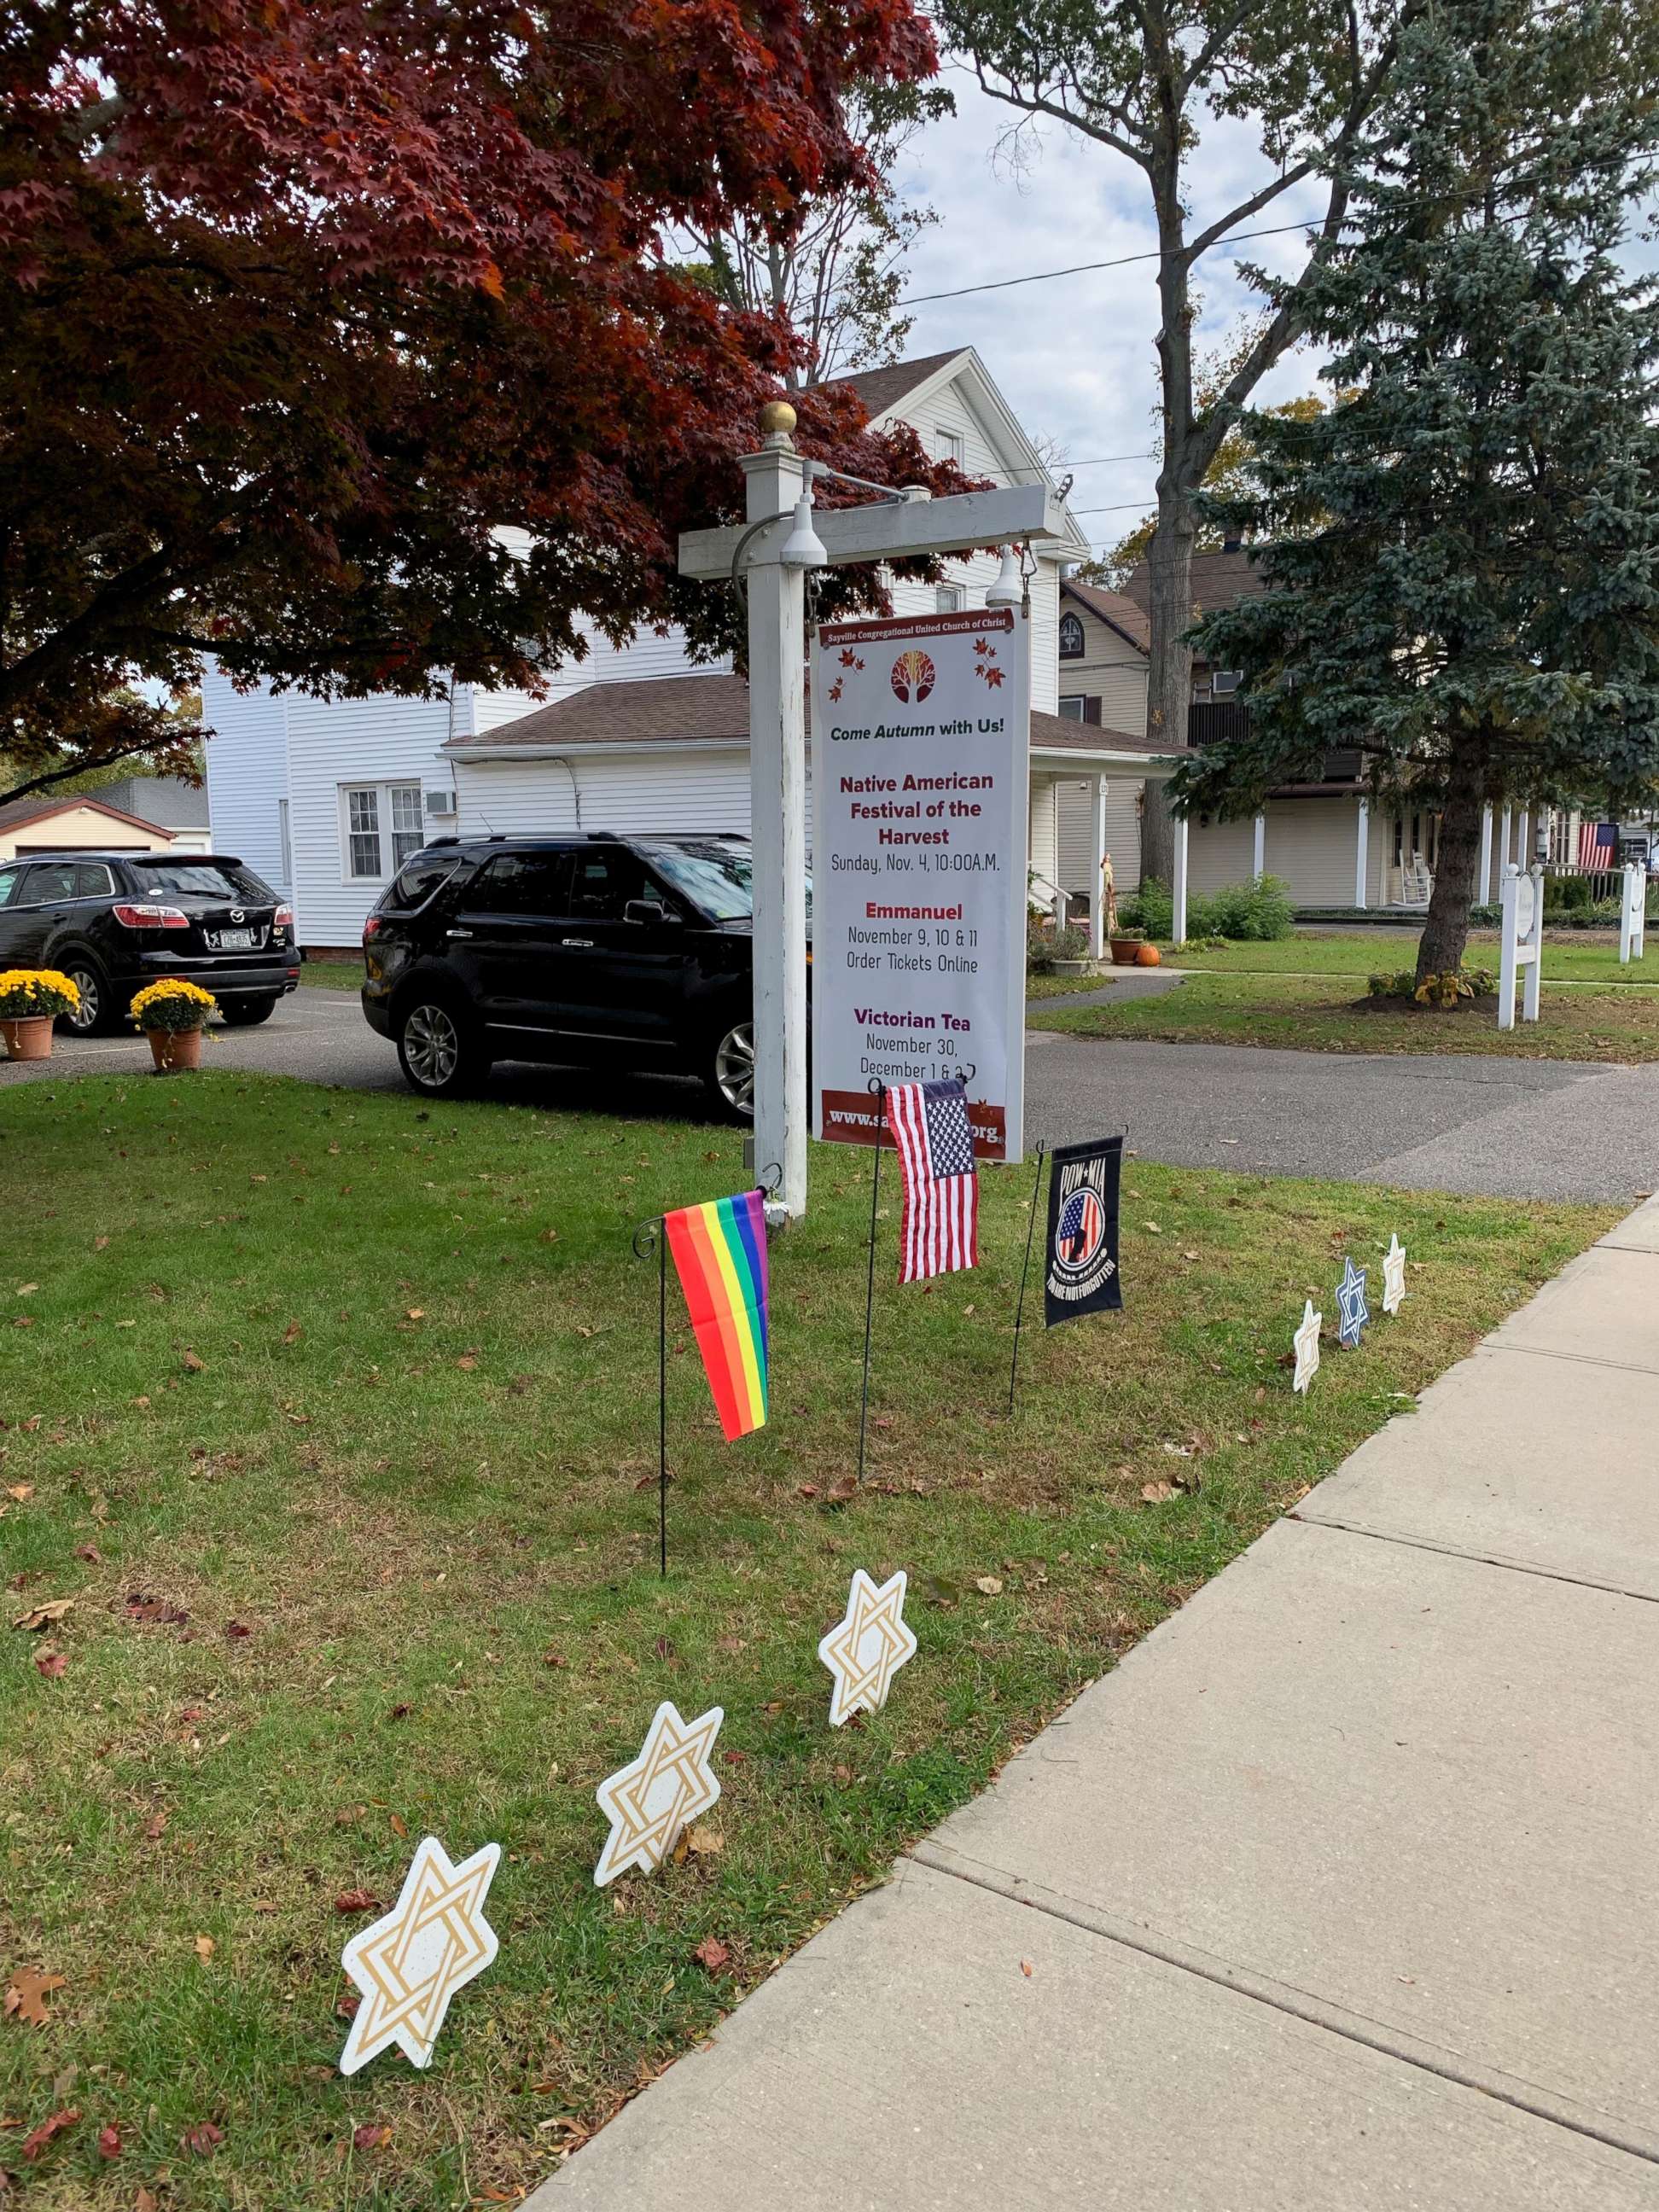 PHOTO: One of six LGBT rainbow flags stolen from the lawn of the Sayville Congregation United Church of Christ on Long Island, New York, since July 29, 2018.